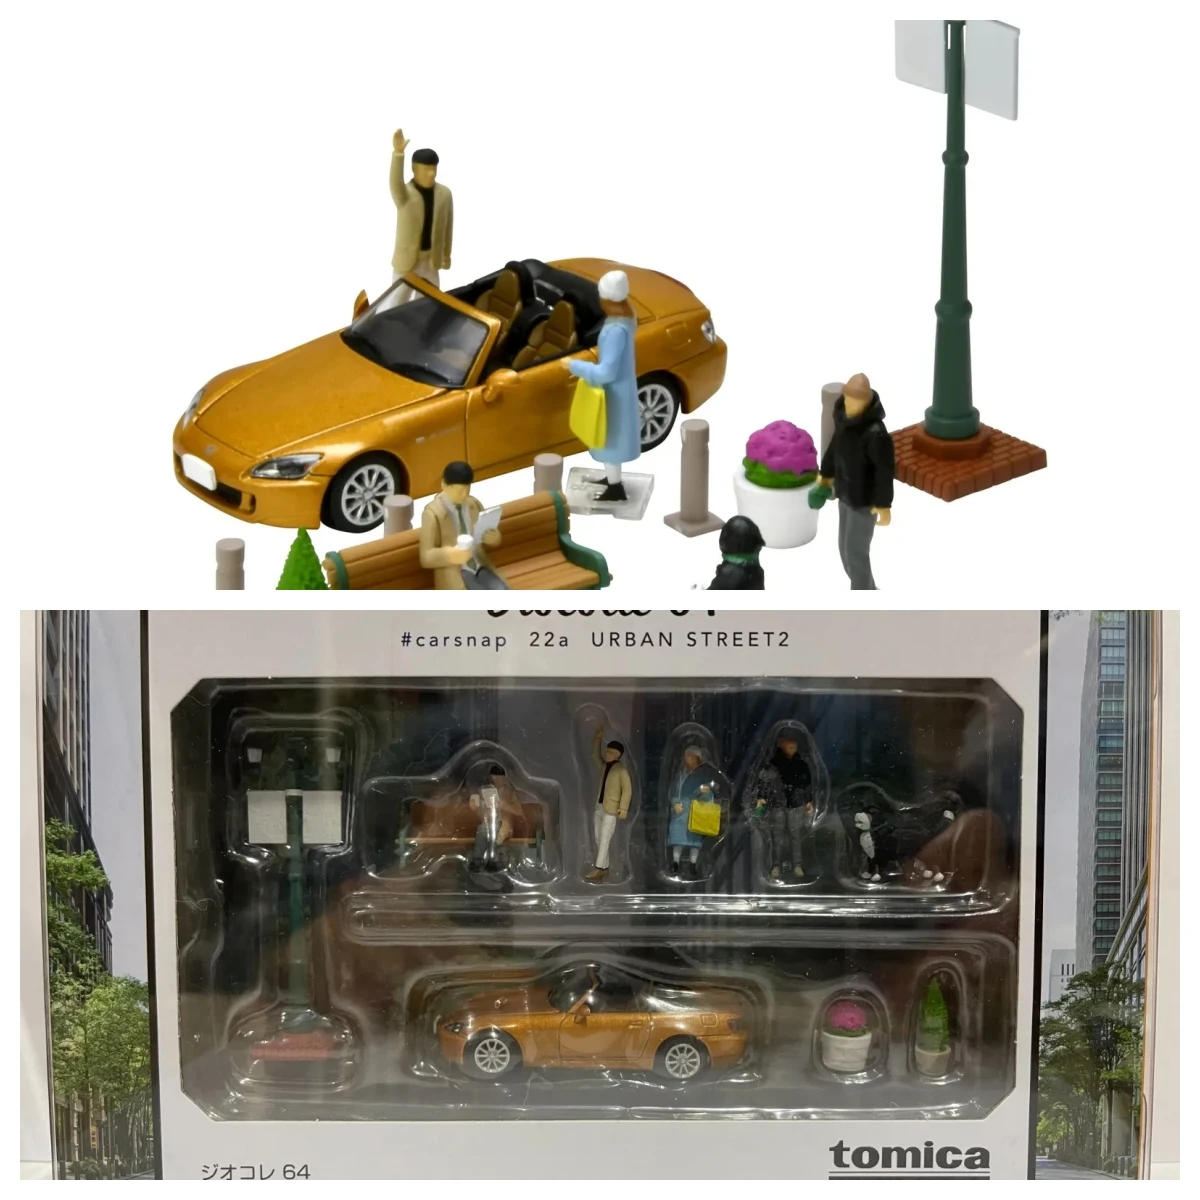 

Tomica Limited Vintage Neo Tomytec Diocolle 64 Carsnap 22a Town S2000 Model Car Collection Limited Edition Hobby Toys